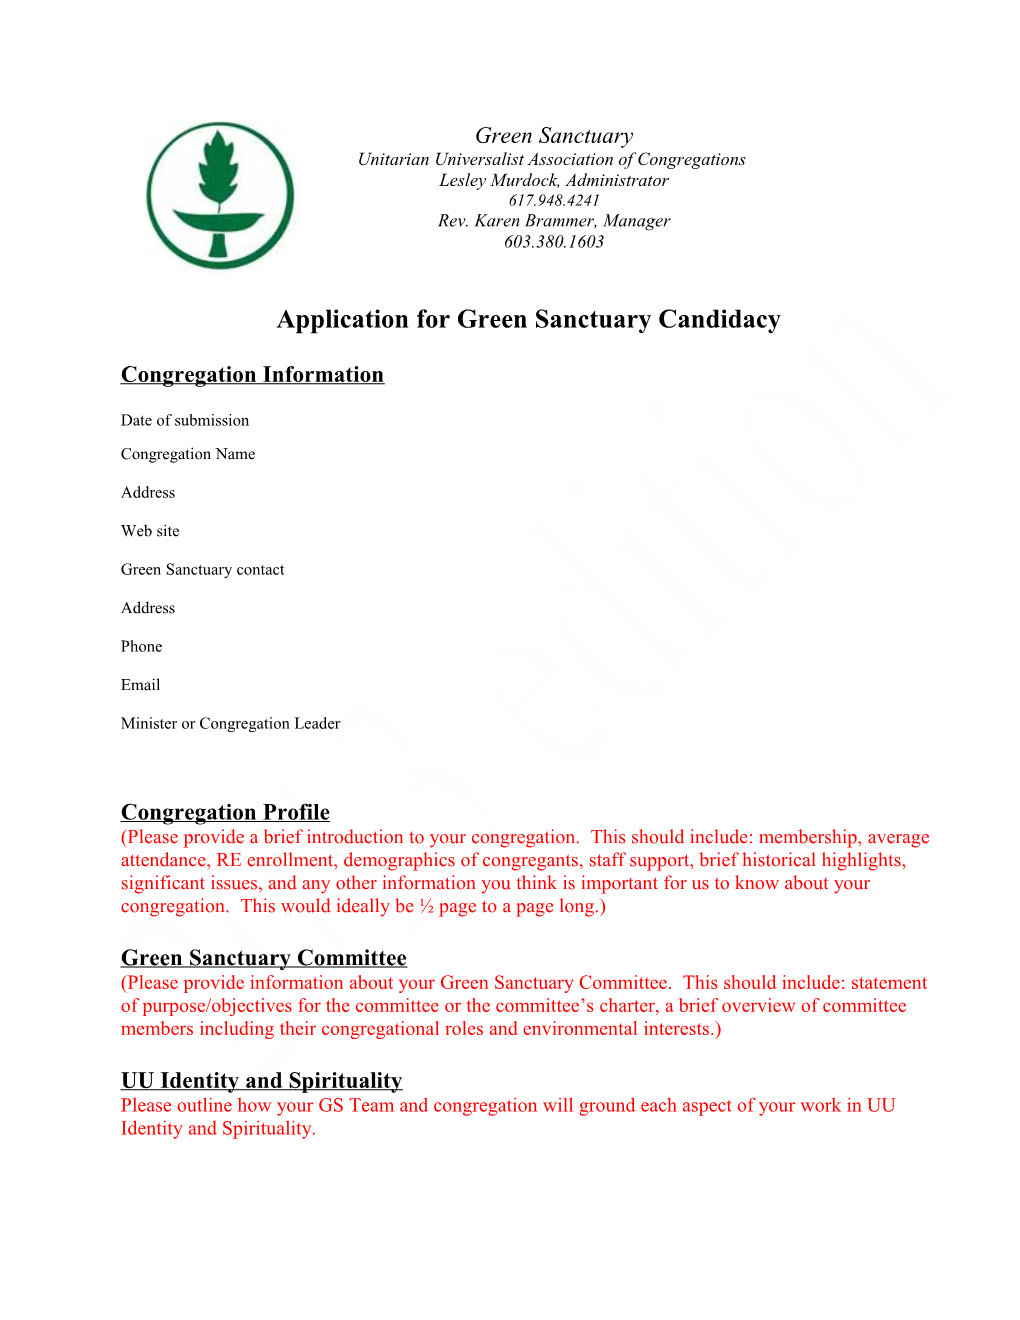 Application for Green Sanctuary Candidacy